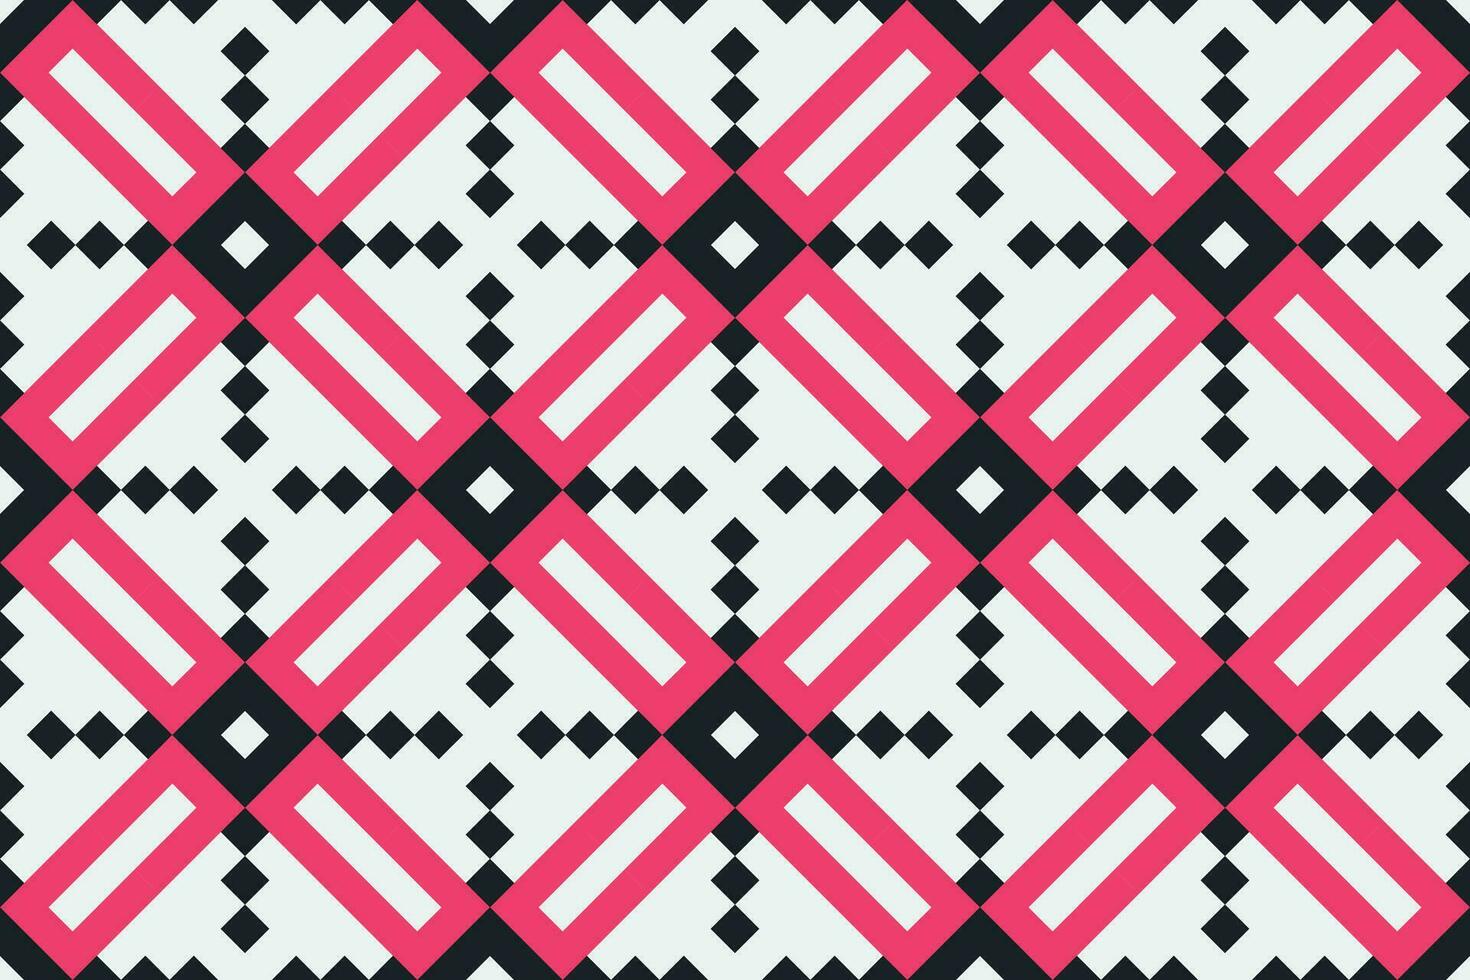 Vector geometric seamless pattern. Abstract graphic background with squares, lines, grid. Simple geo texture. pink, black and white color. Ethnic style ornament. Repeat vintage design for decor, print